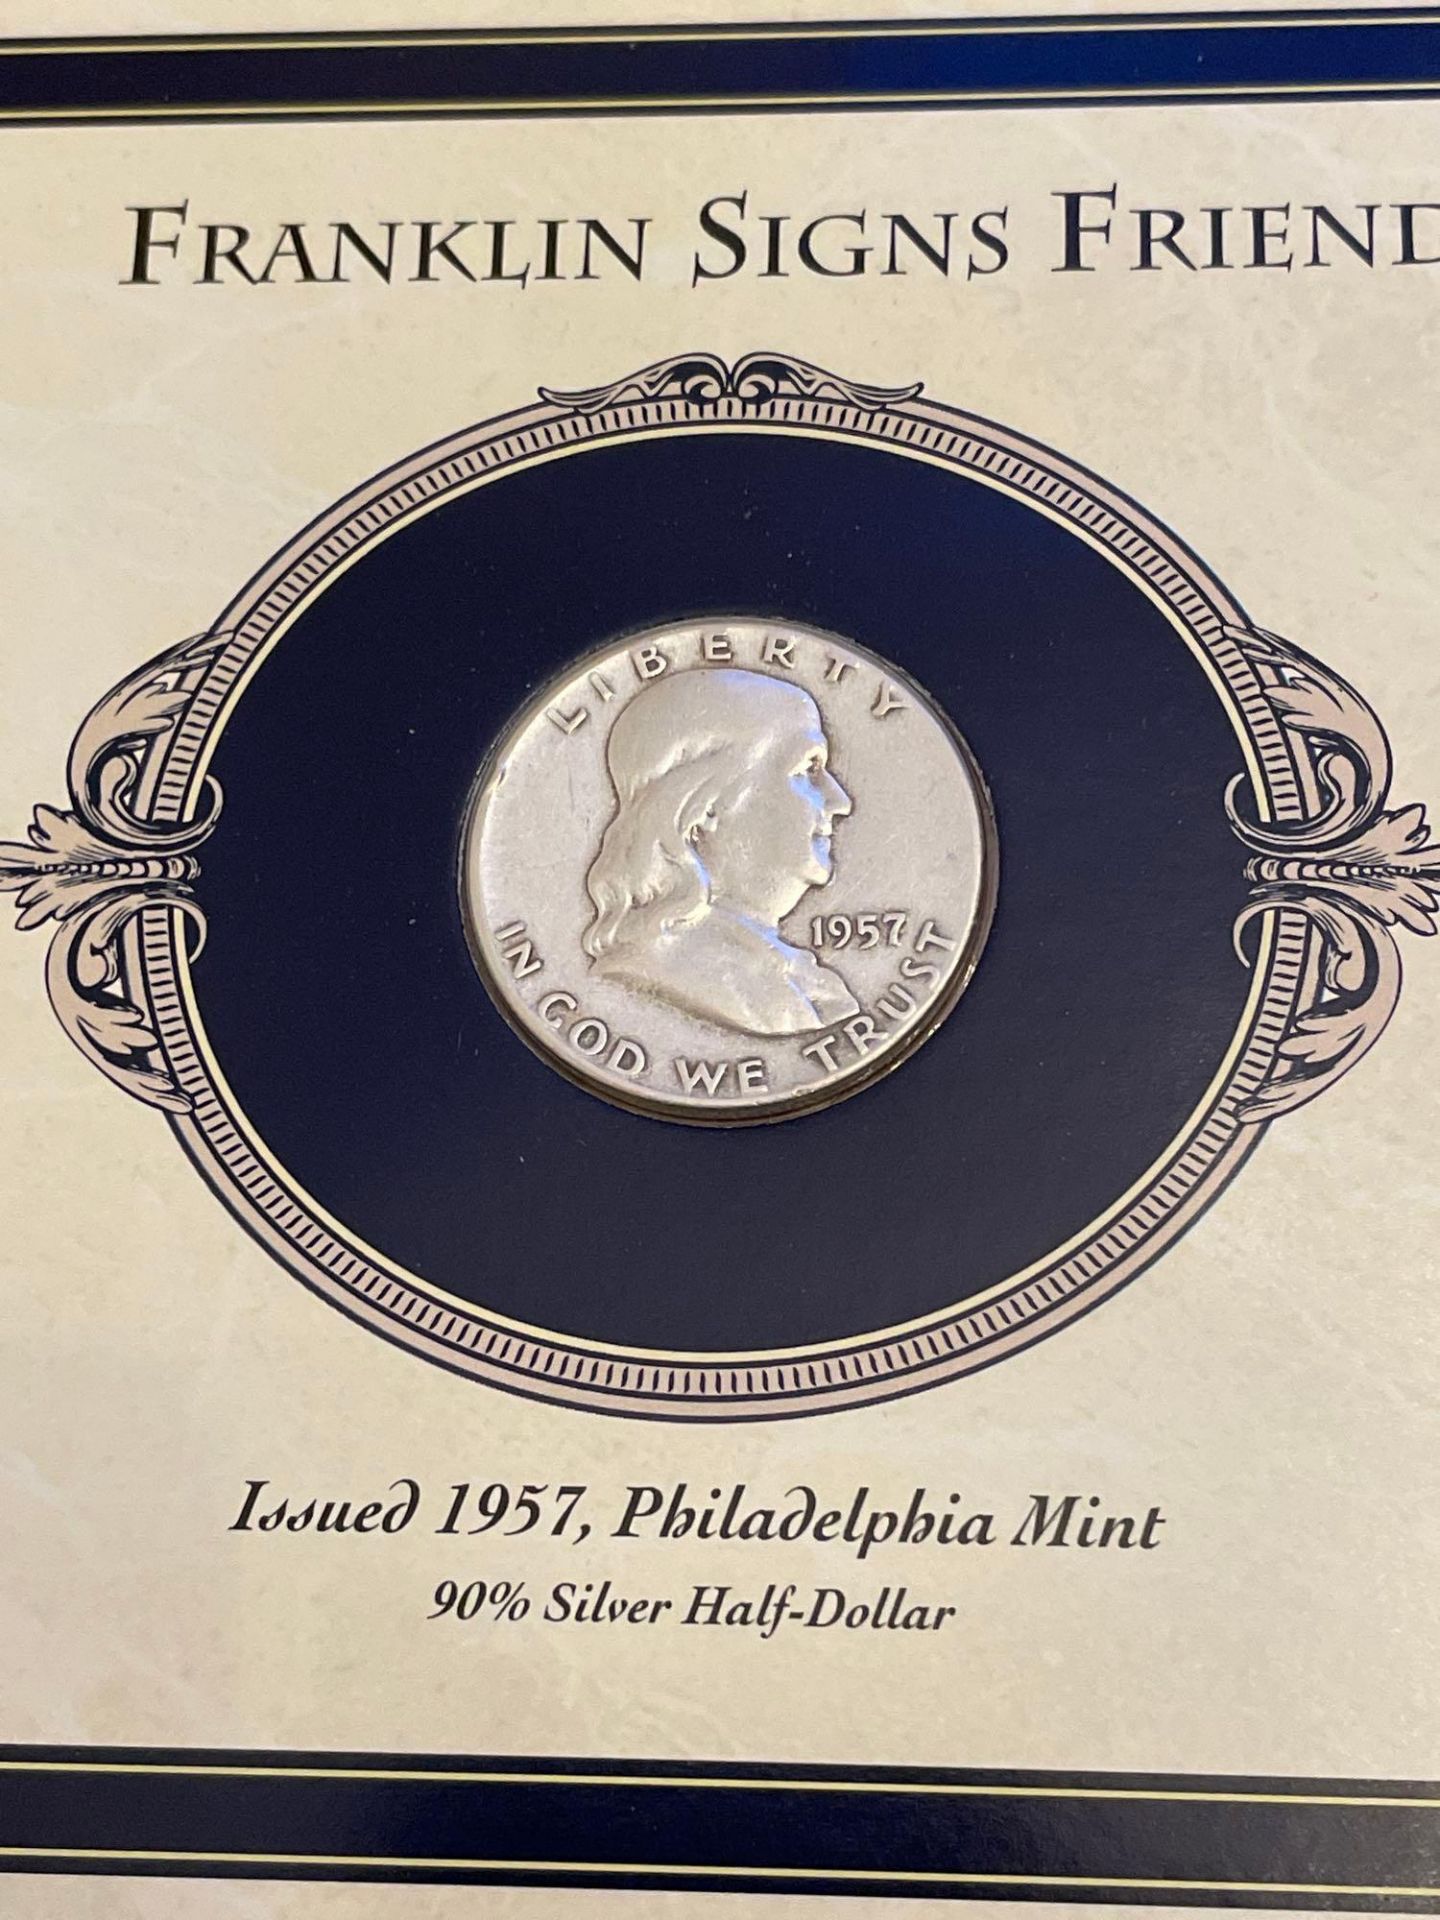 1951 Franklin Silver Half-Dollar with U.S. French Alliance Stamp - Image 2 of 5